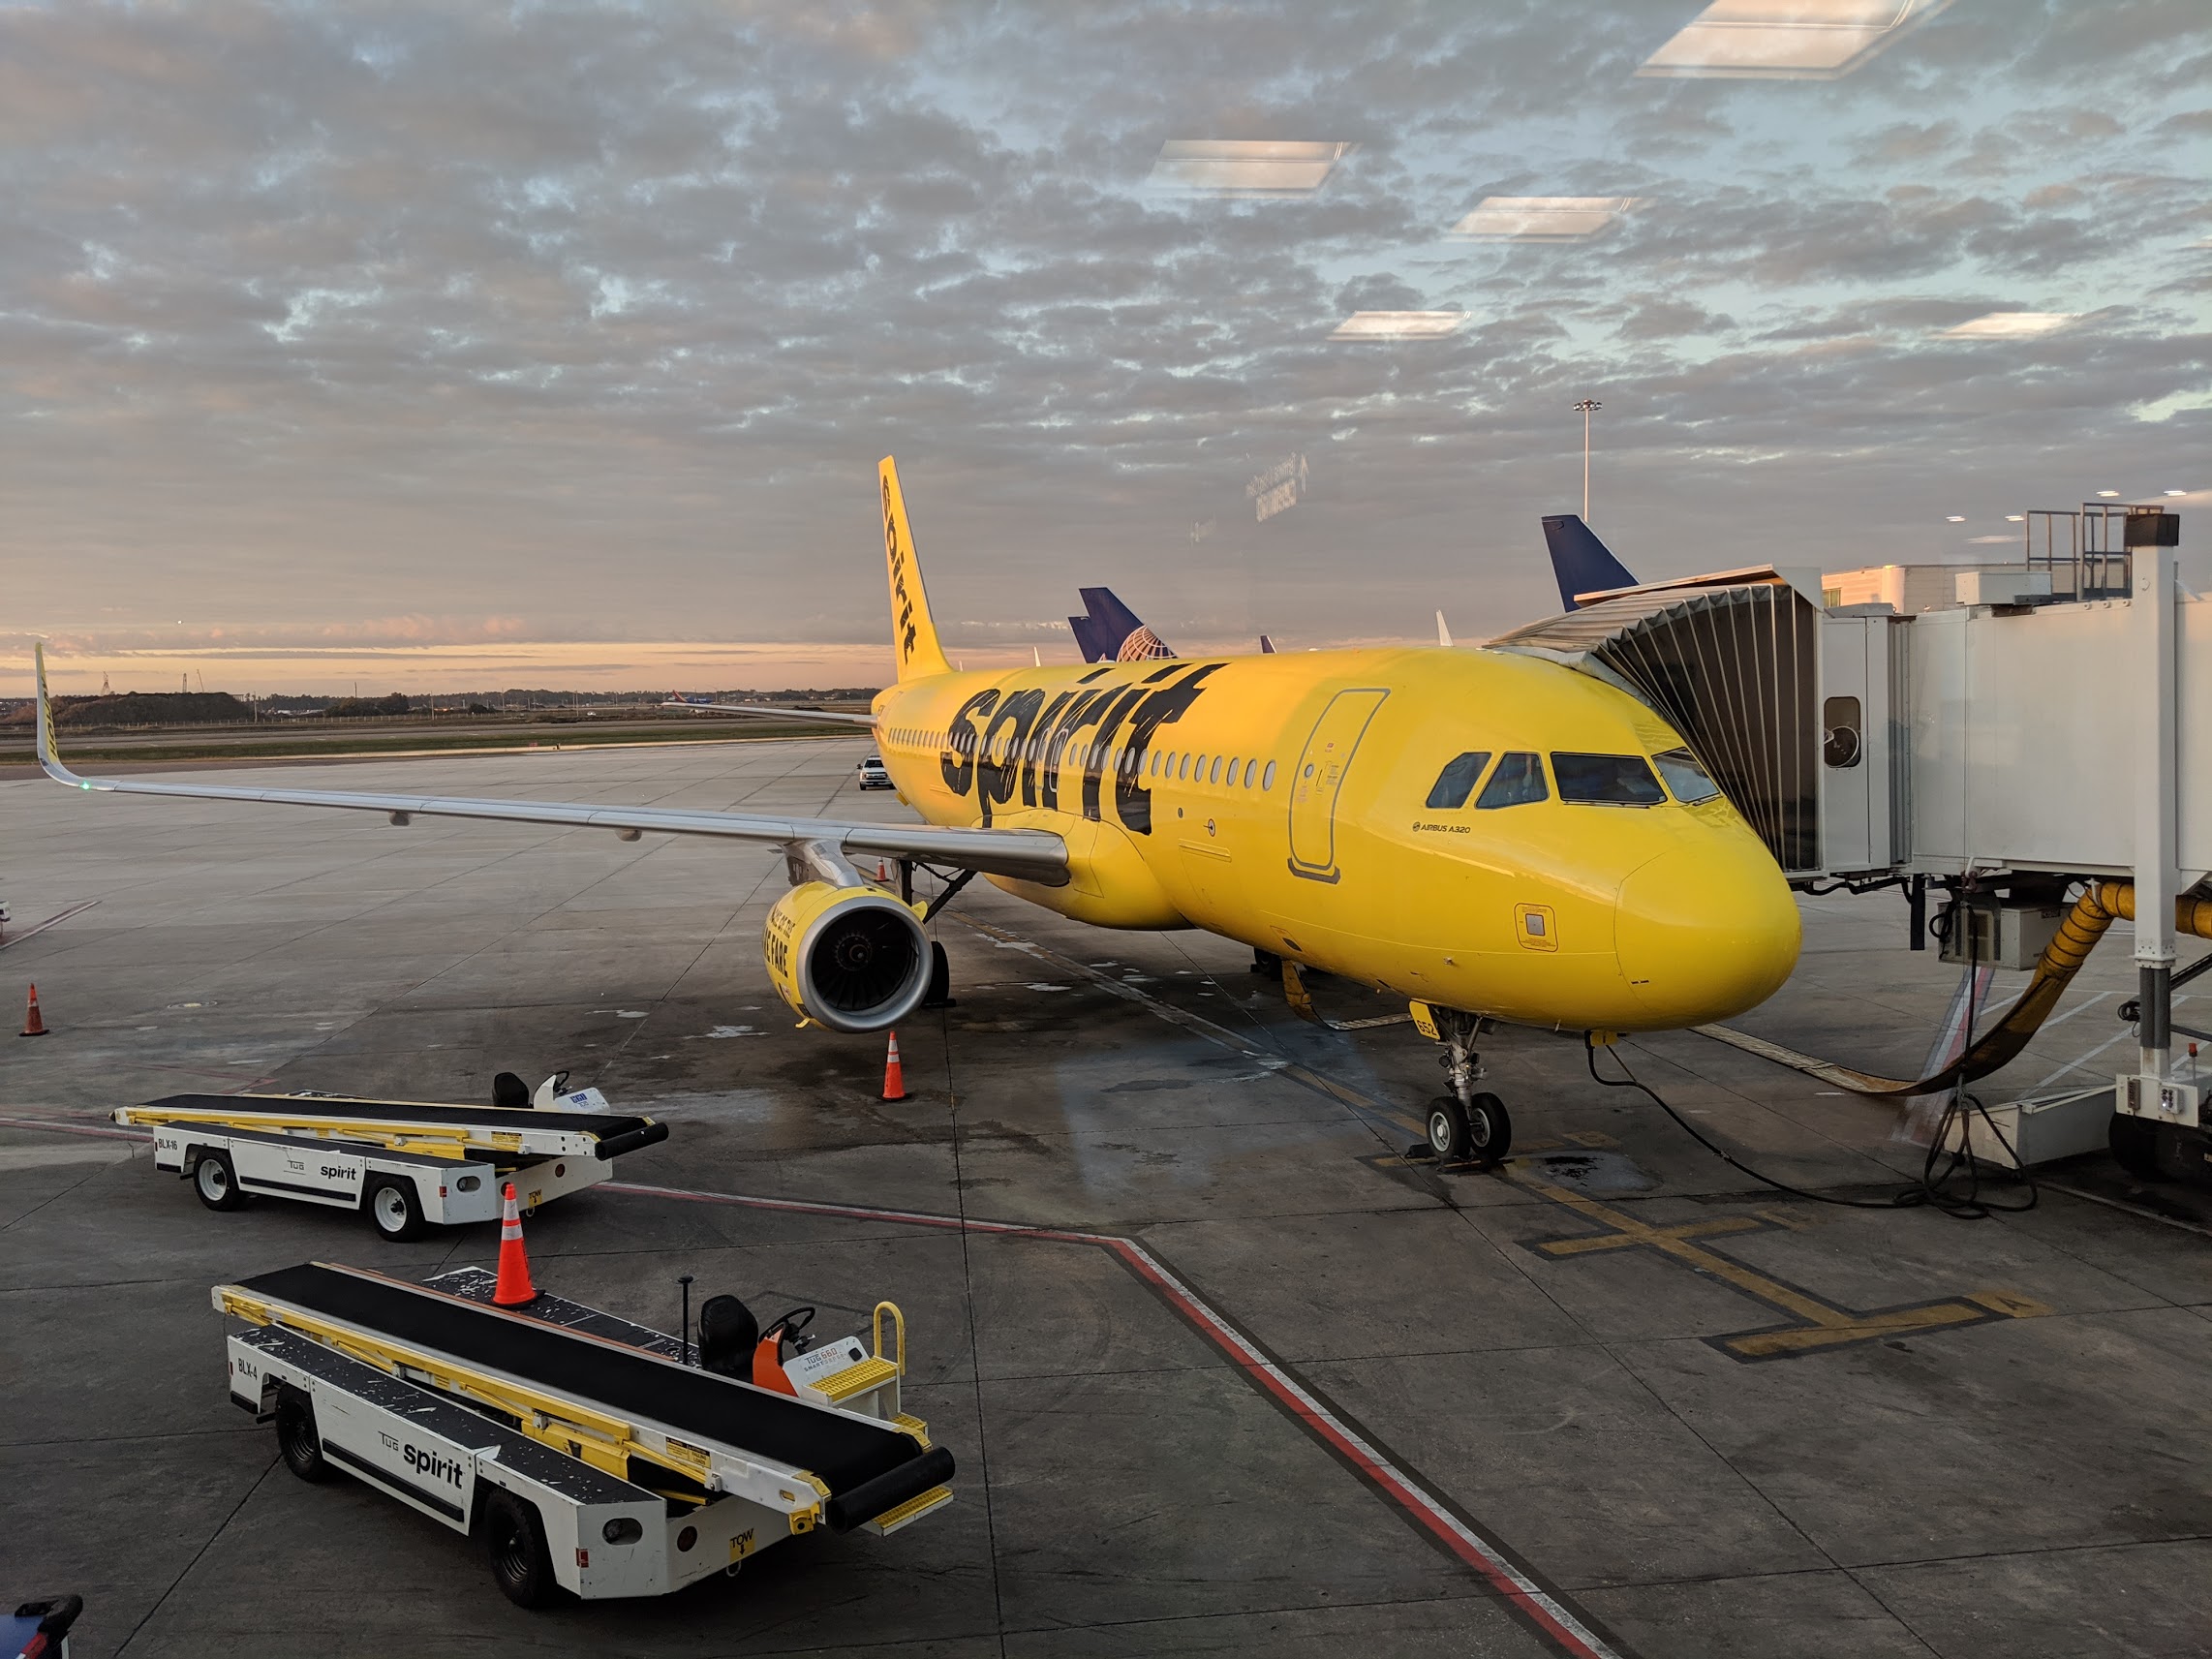 a yellow airplane at an airport